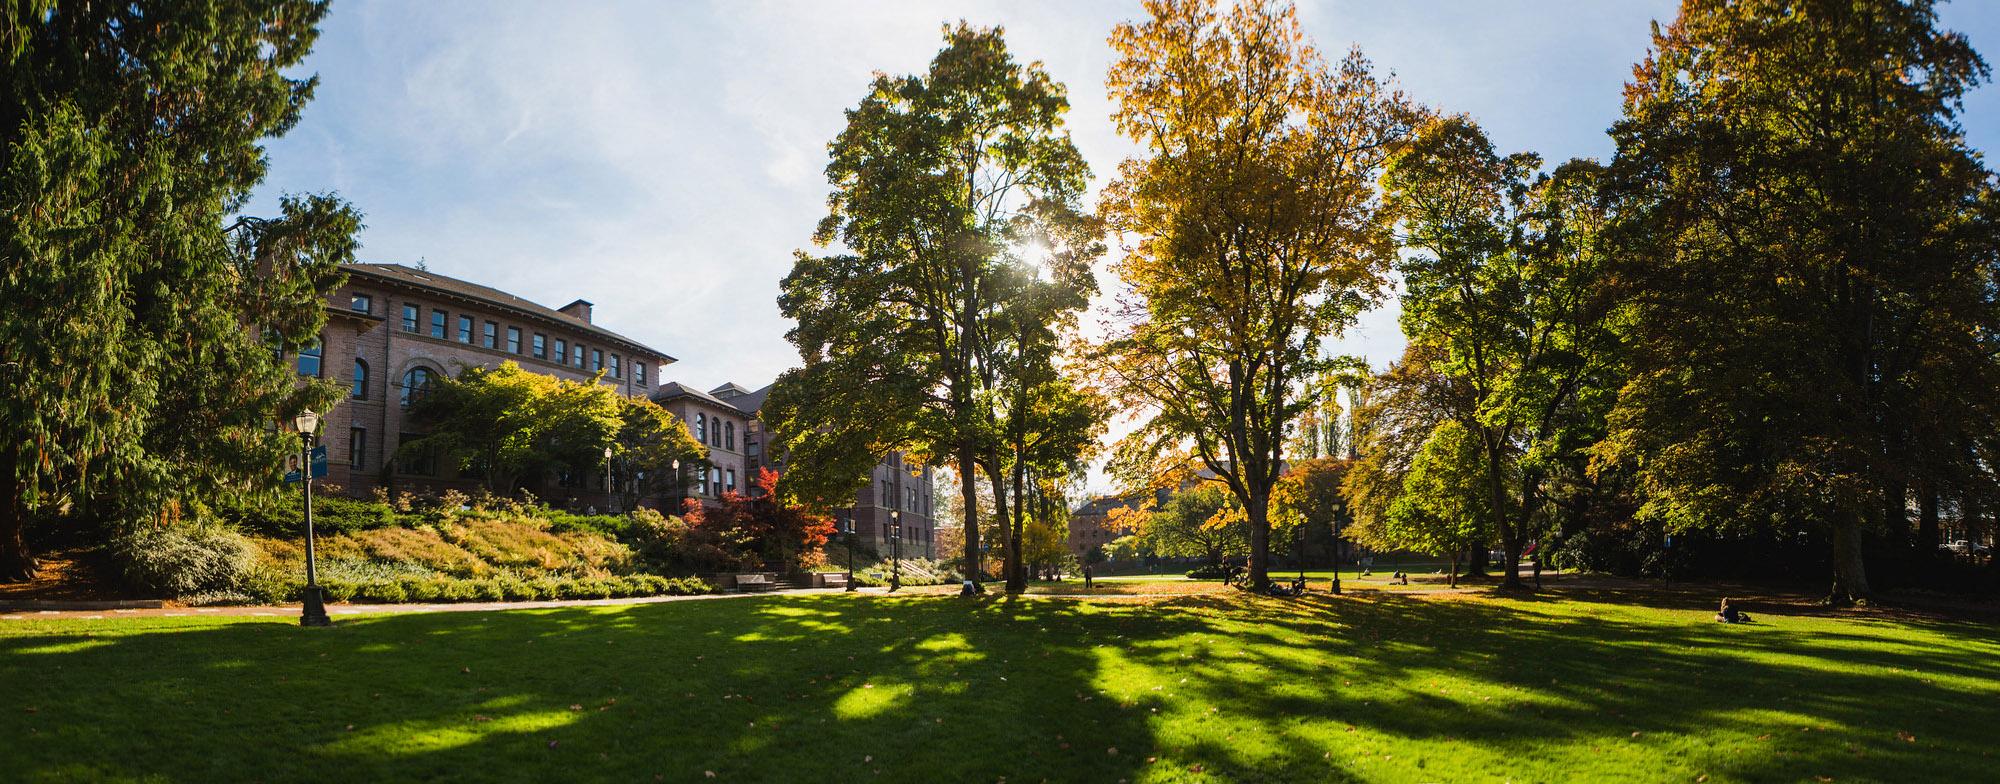 Old Main lawn in the summer time. The sun shines through tall trees and casts big shadows on the bright green lawn. A red Japanese maple by the staircase stands out with its rusty foliage.